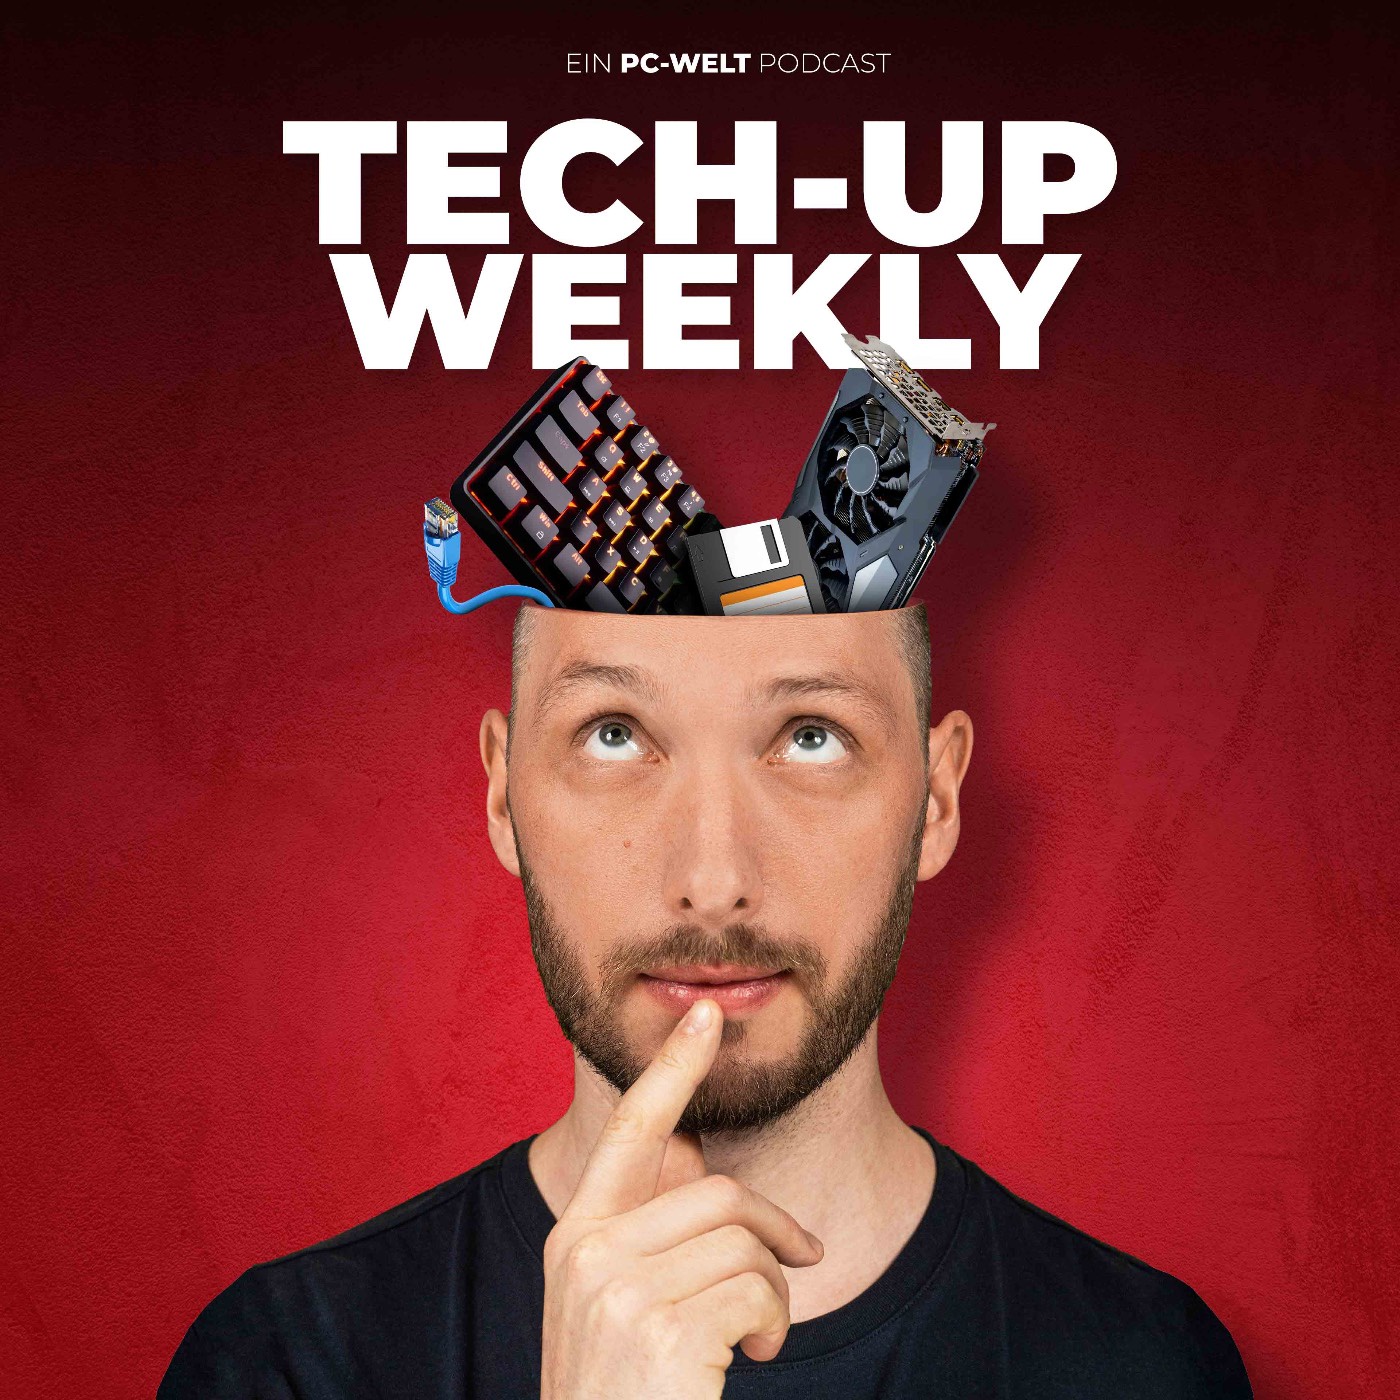 Tech-Up Weekly